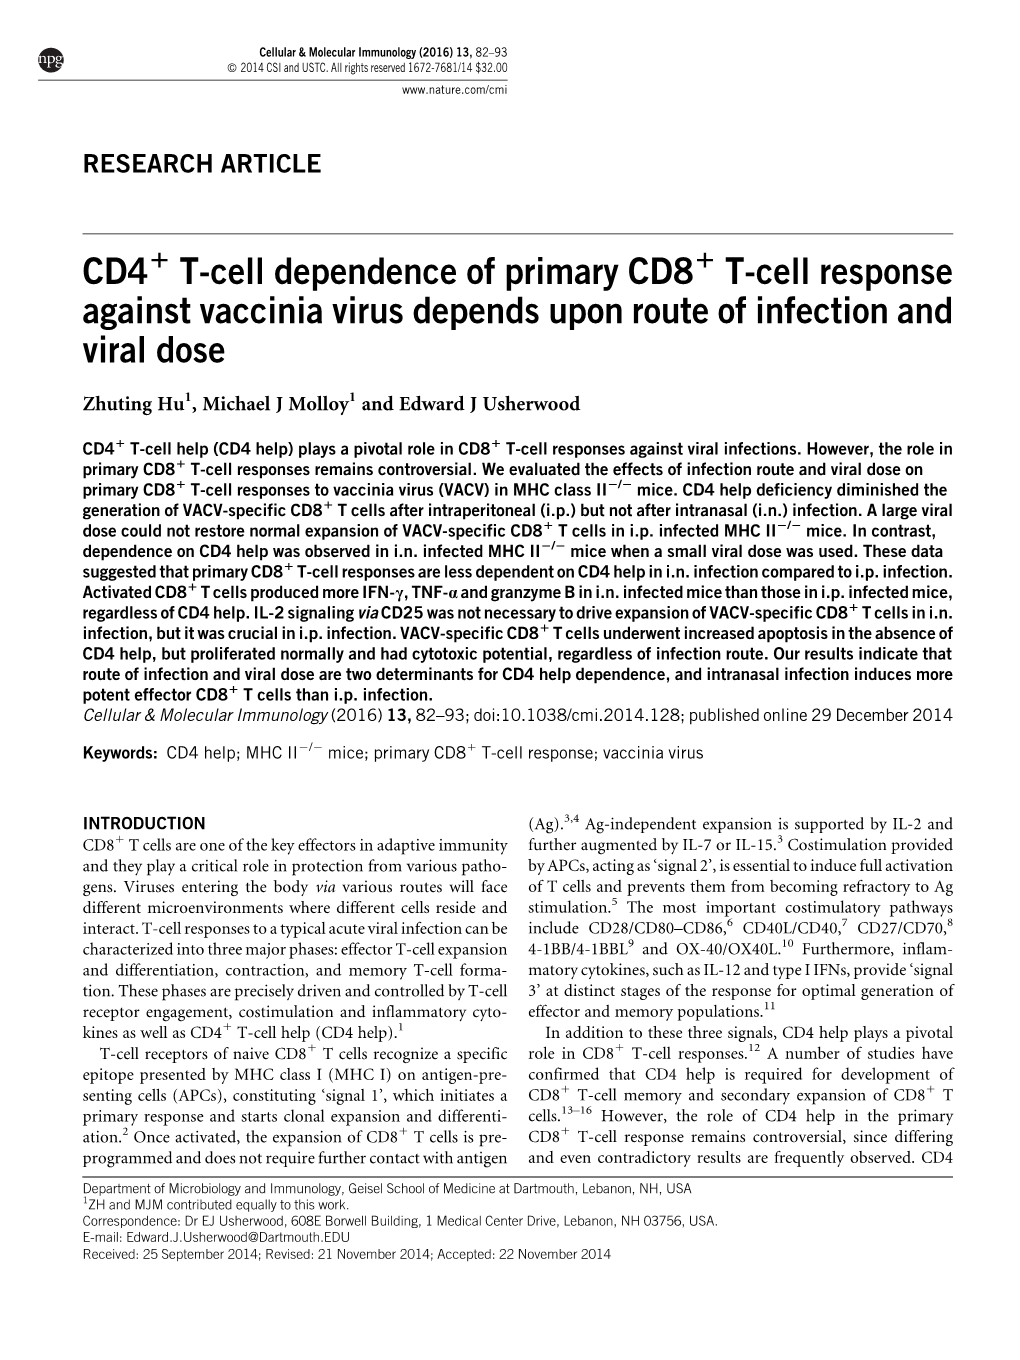 CD4 T-Cell Dependence of Primary CD8 T-Cell Response Against